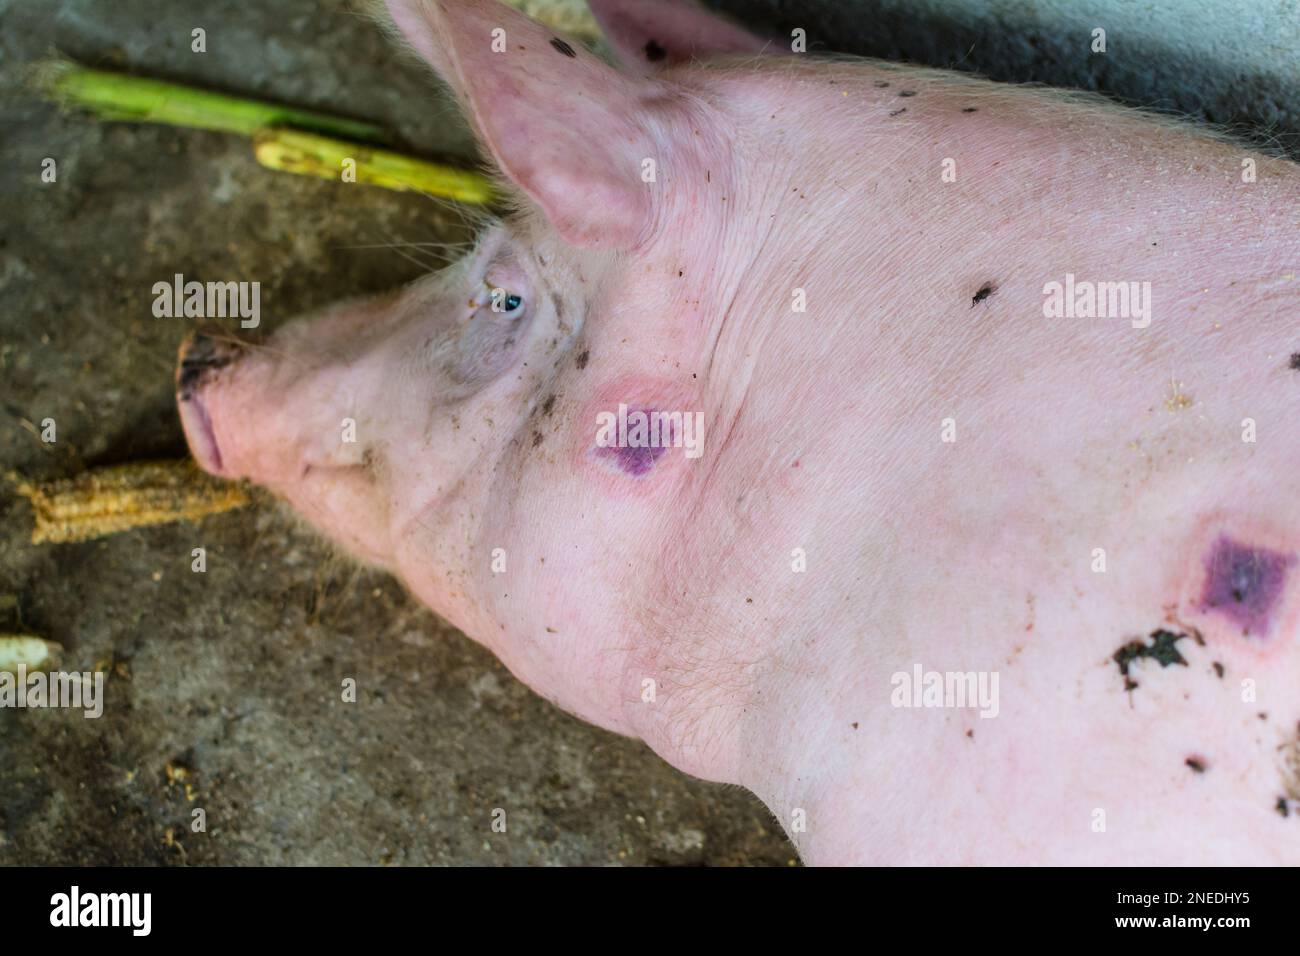 Close-up photo of a pig with Swine erysipelas Stock Photo